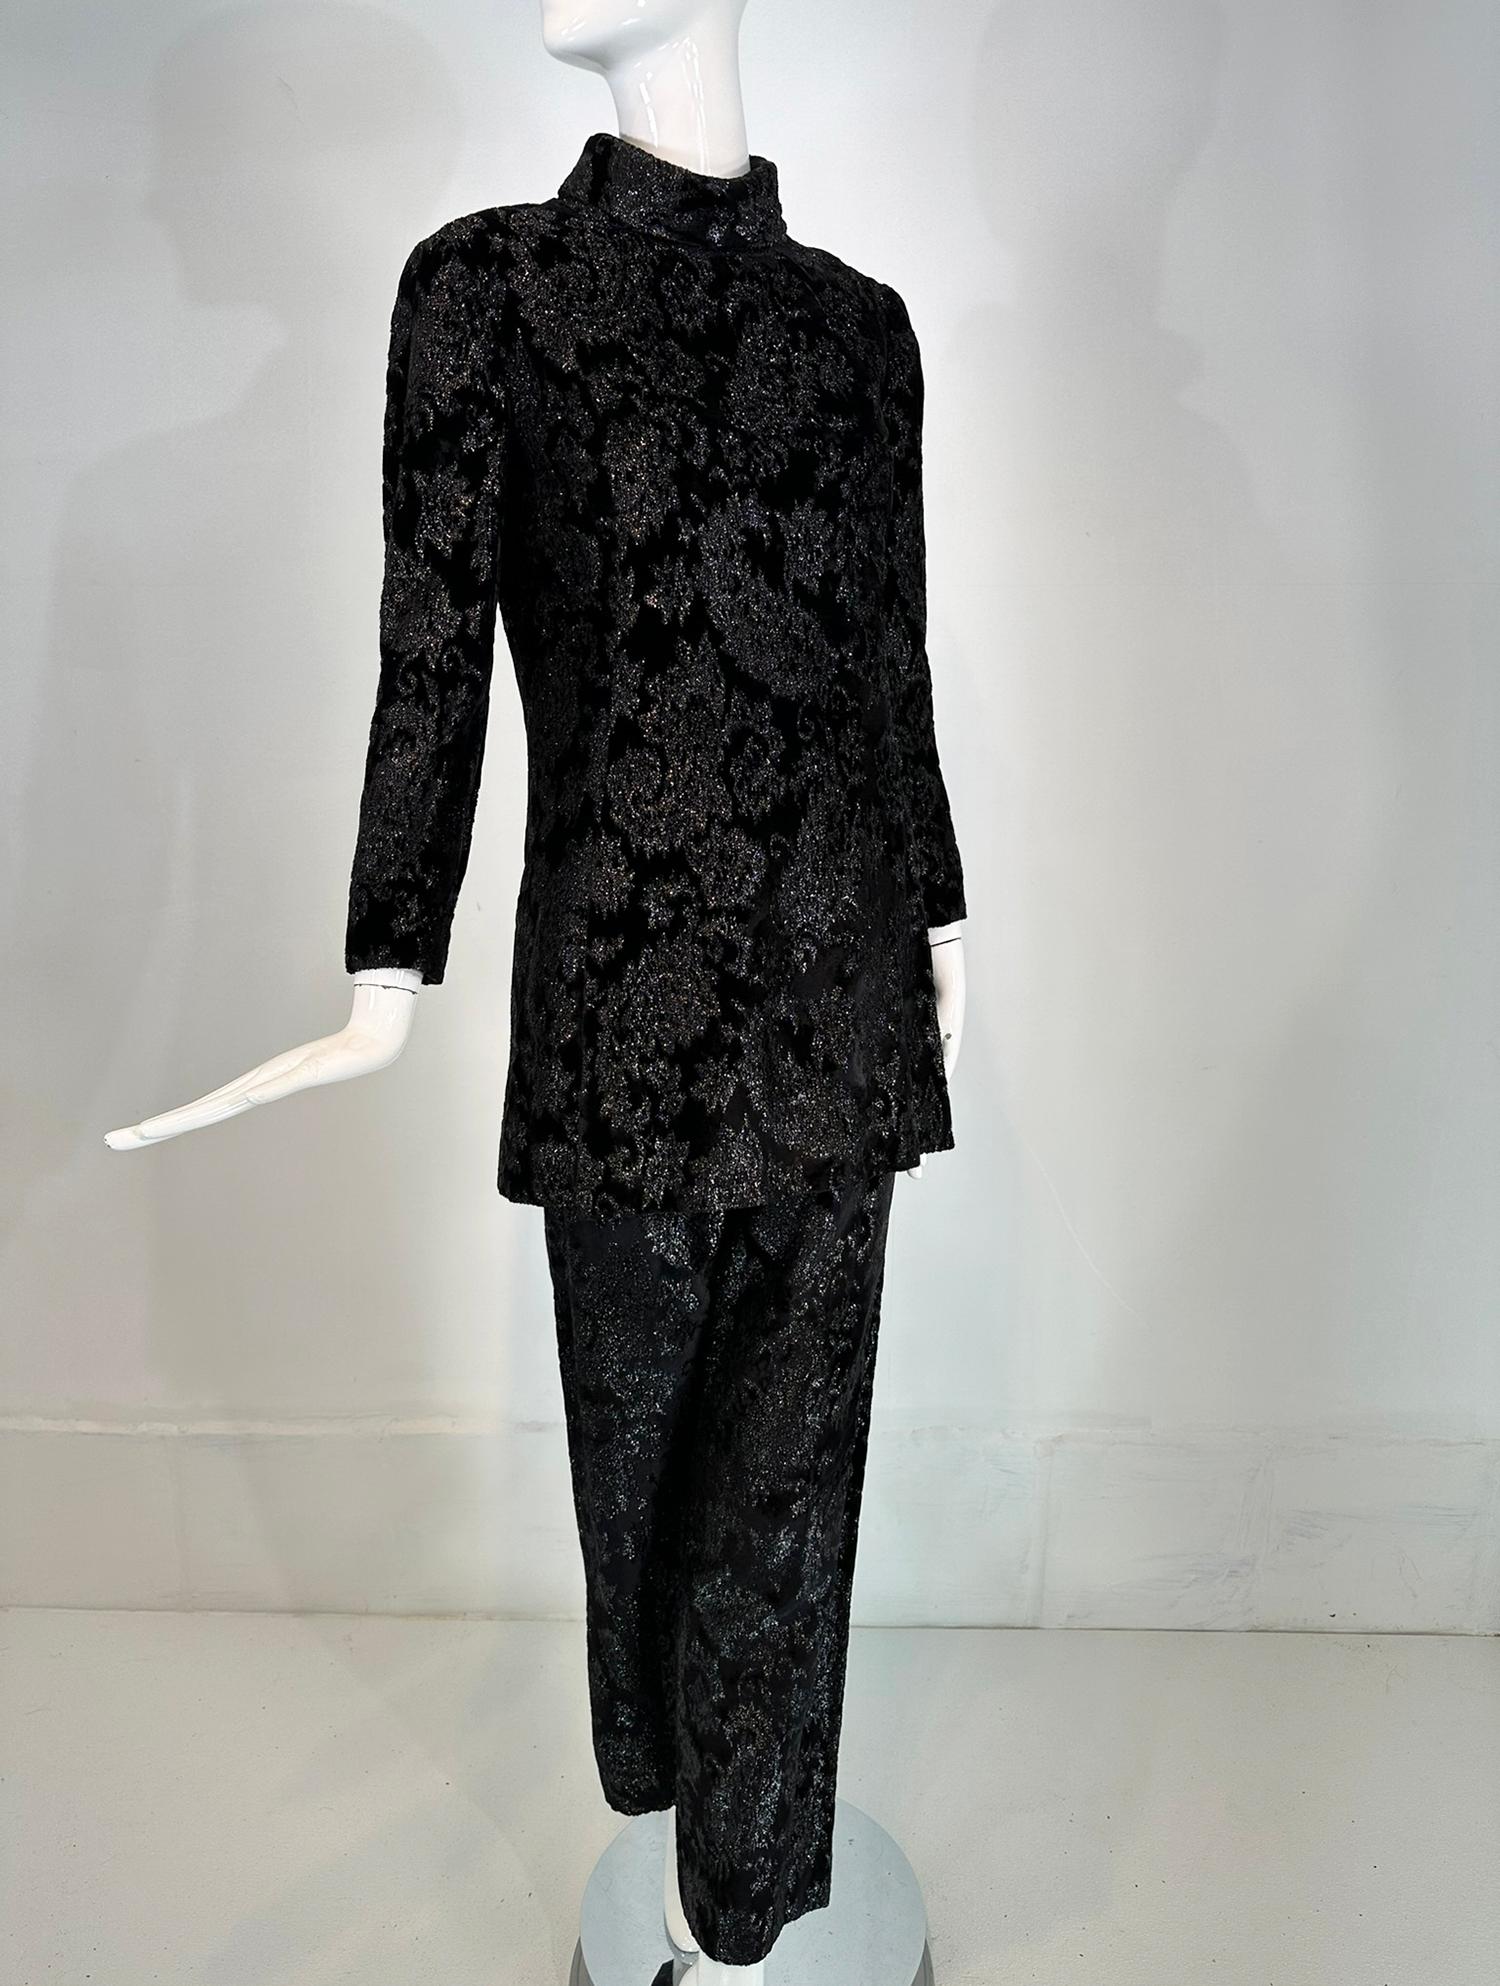 Givenchy Black Princess Seam Glittery Paisley Cut Velvet Tunic & Pant Set 1970s In Good Condition For Sale In West Palm Beach, FL